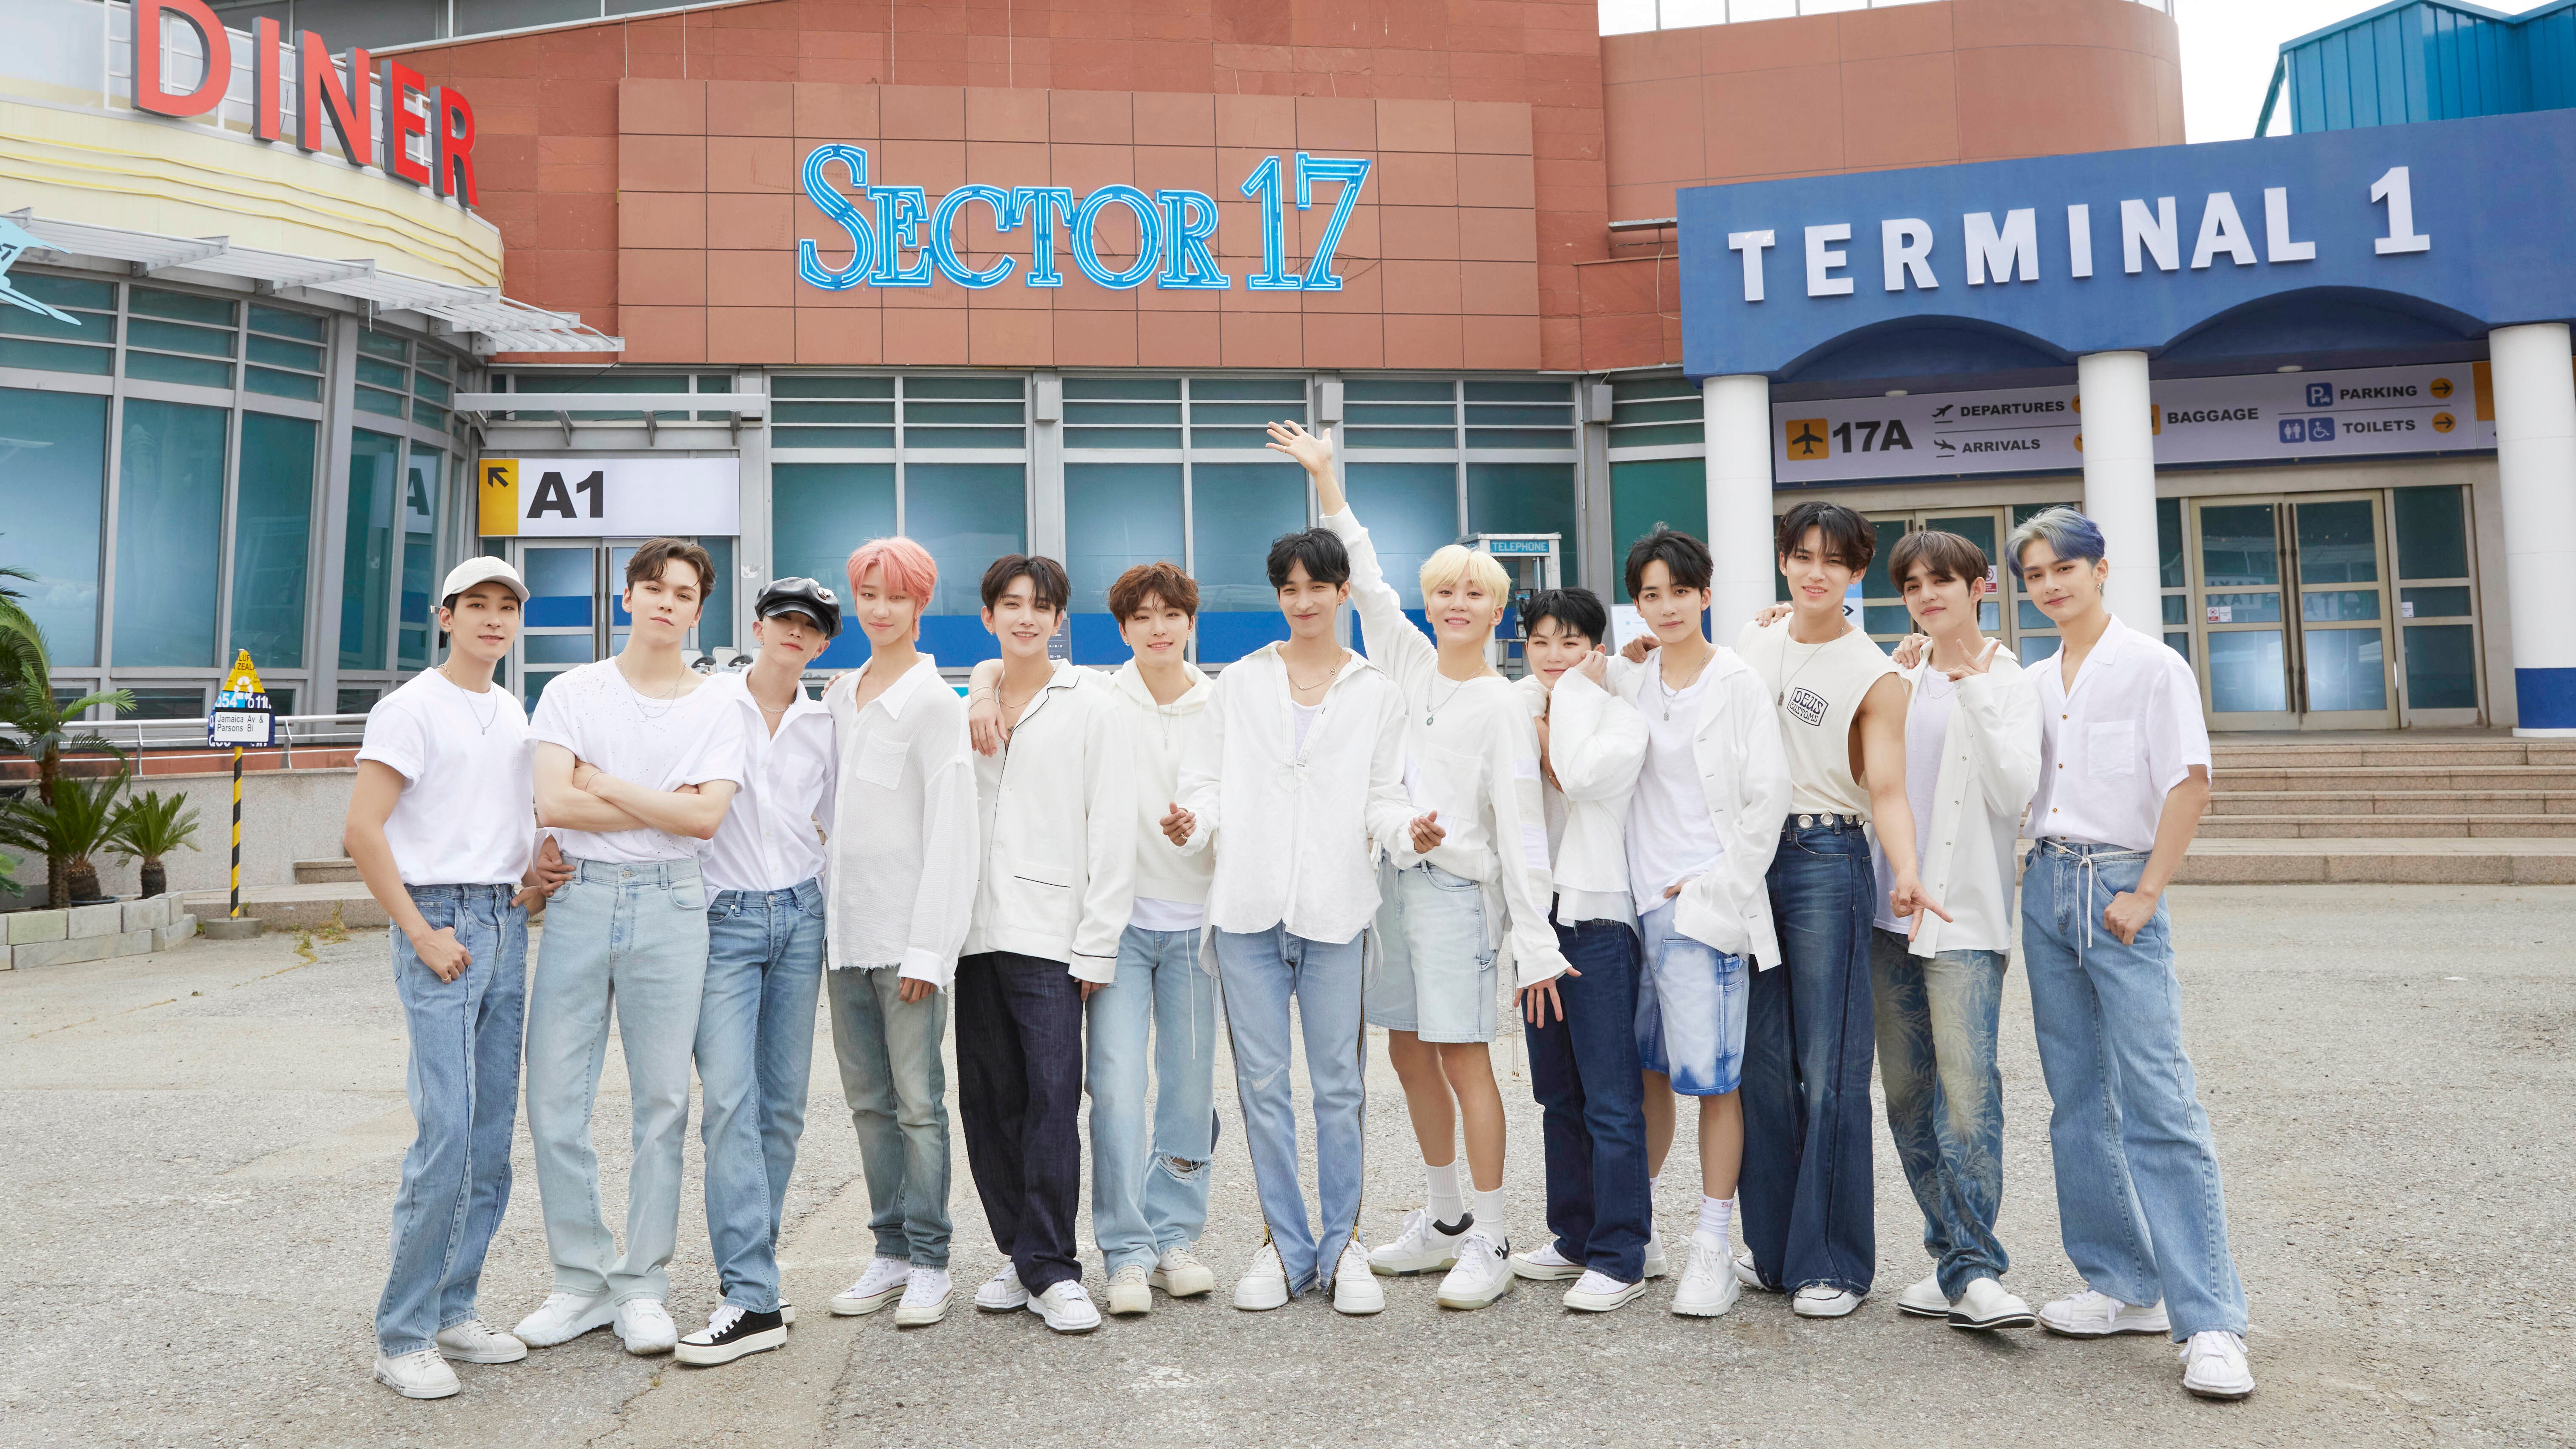 SEVENTEEN Discuss Second Repackage Album “Sector 17” and “Be The Sun Tour